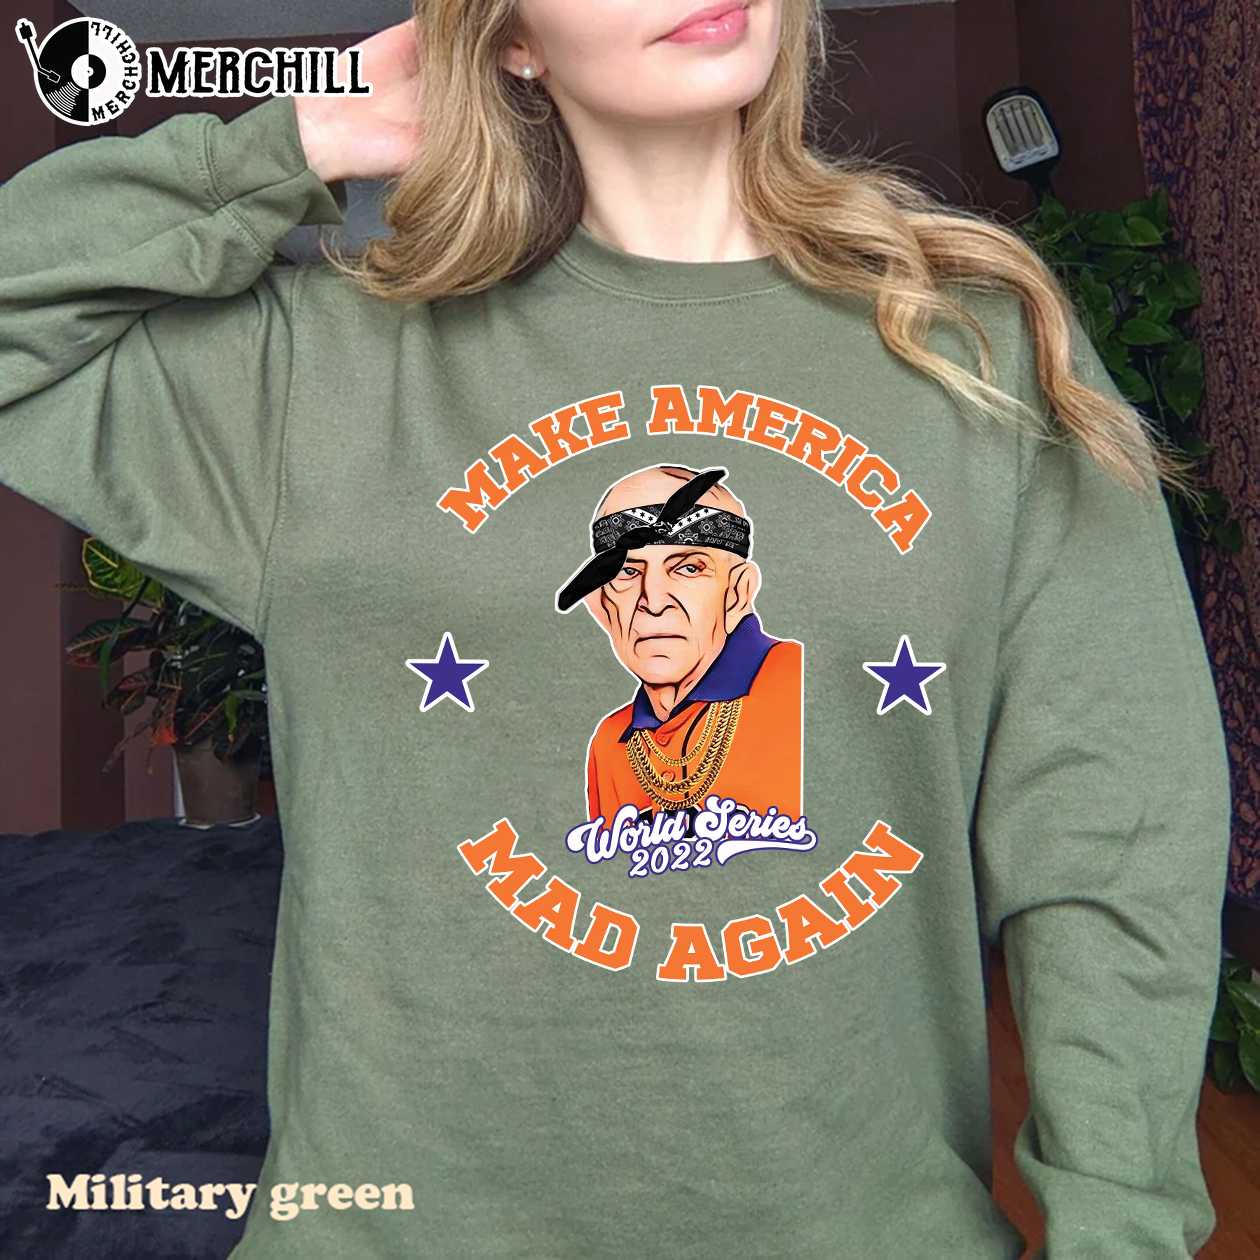 Make America Mad Again Astros Shirt, Astros Fan Shirts, Gifts for